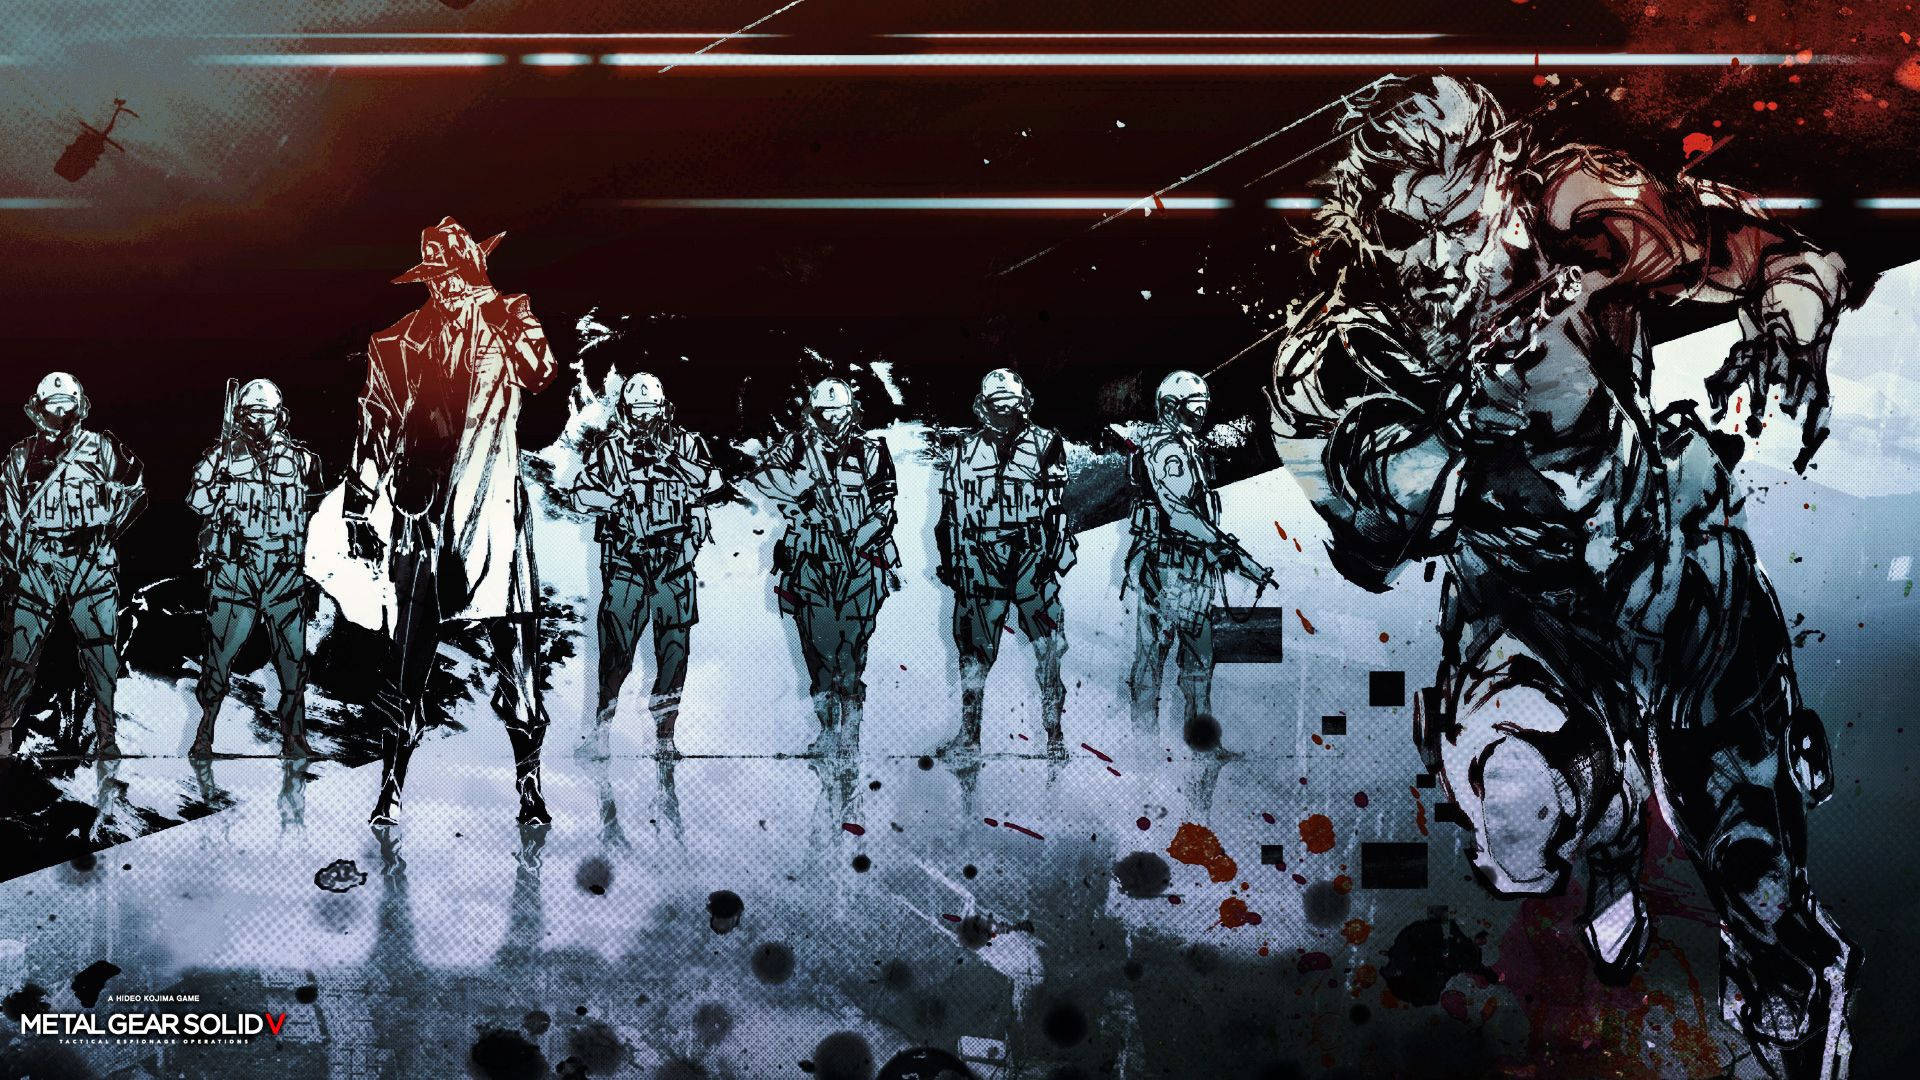 Experience the revolutionary world of Metal Gear Solid Wallpaper